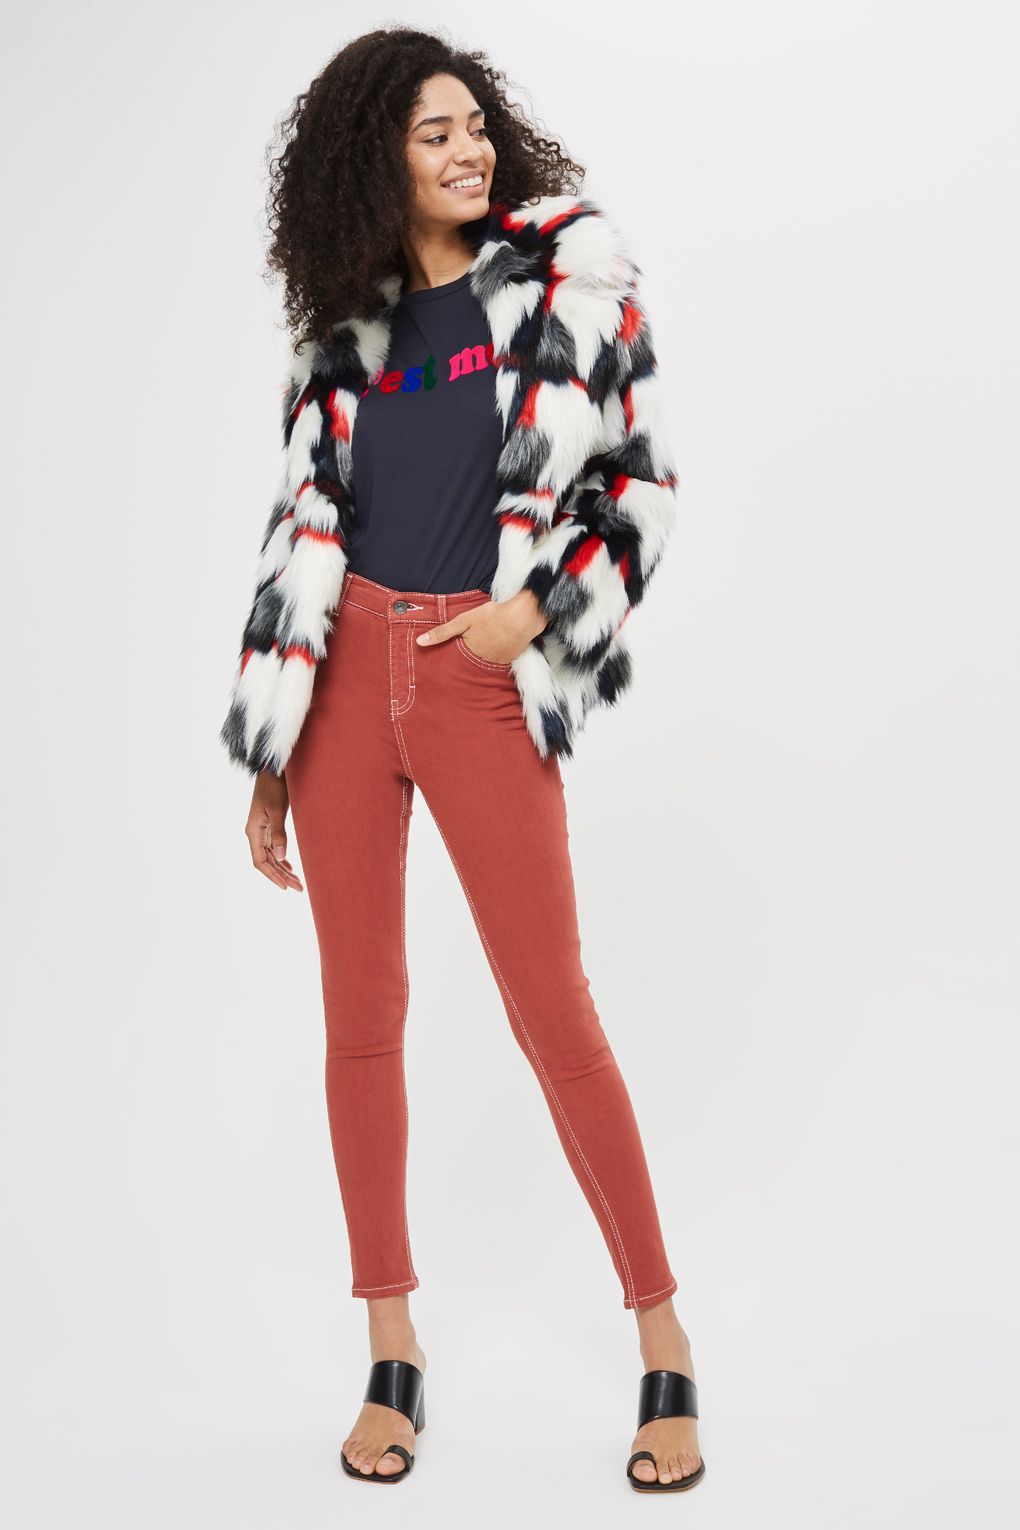 Woman wearing white, black, red, and gray faux-fur jacket, black t-shirt with multi-colored 